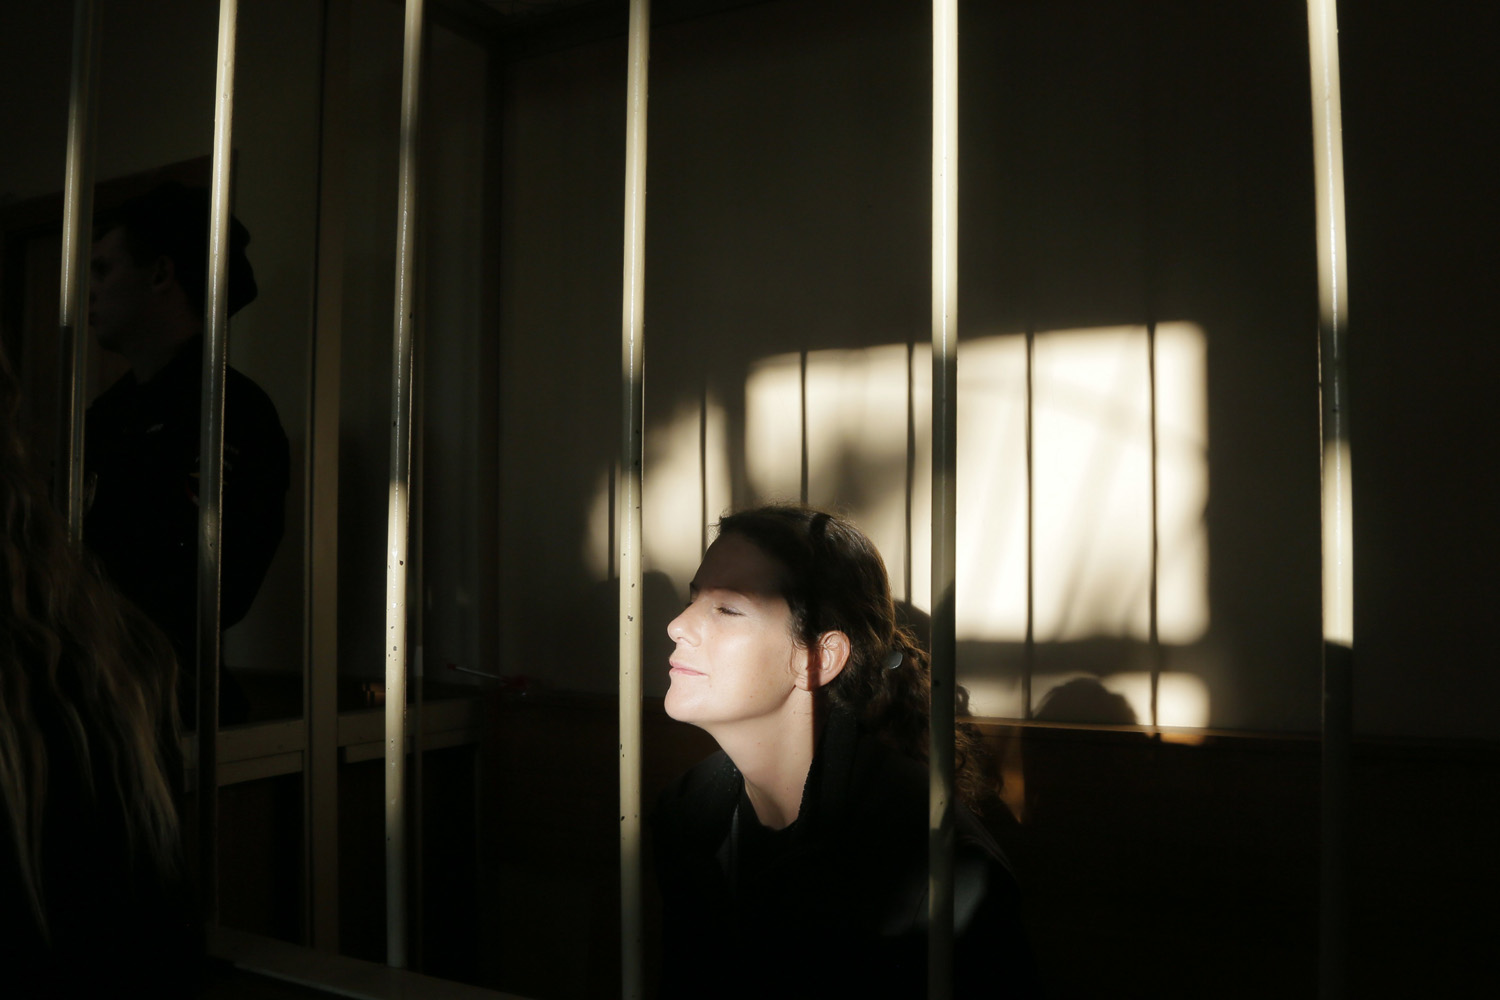 Nov. 18, 2013. Greenpeace International activist Ana Paula Alminhana Maciel of Brazil sits behind bars during a court hearing to consider the request to extend the detention of 30 members of the Arctic Sunrise Greenpeace International ship in St. Petersburg, Russia.